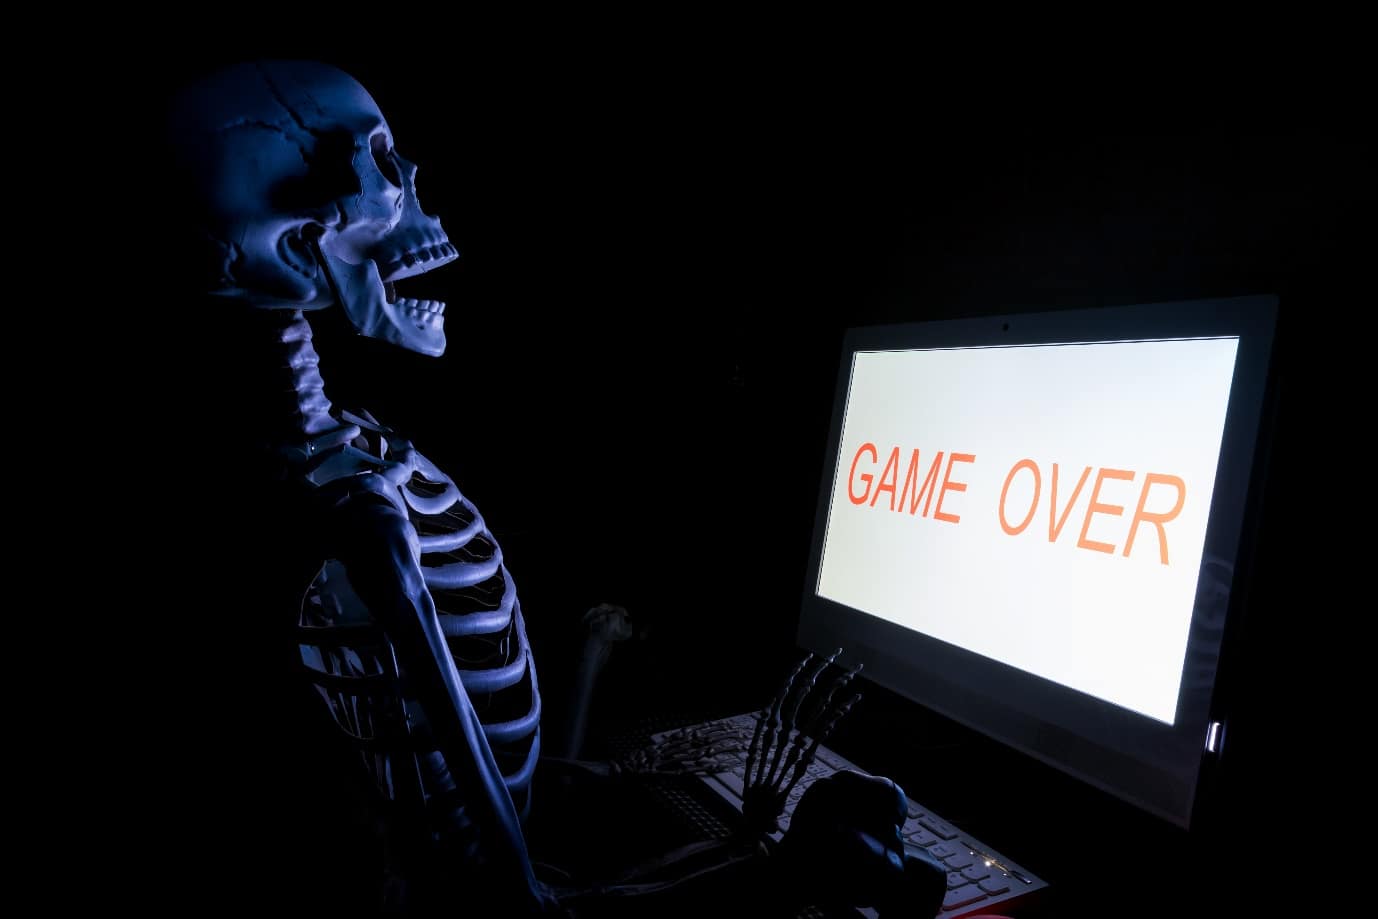 skeleton and game over on computer screen